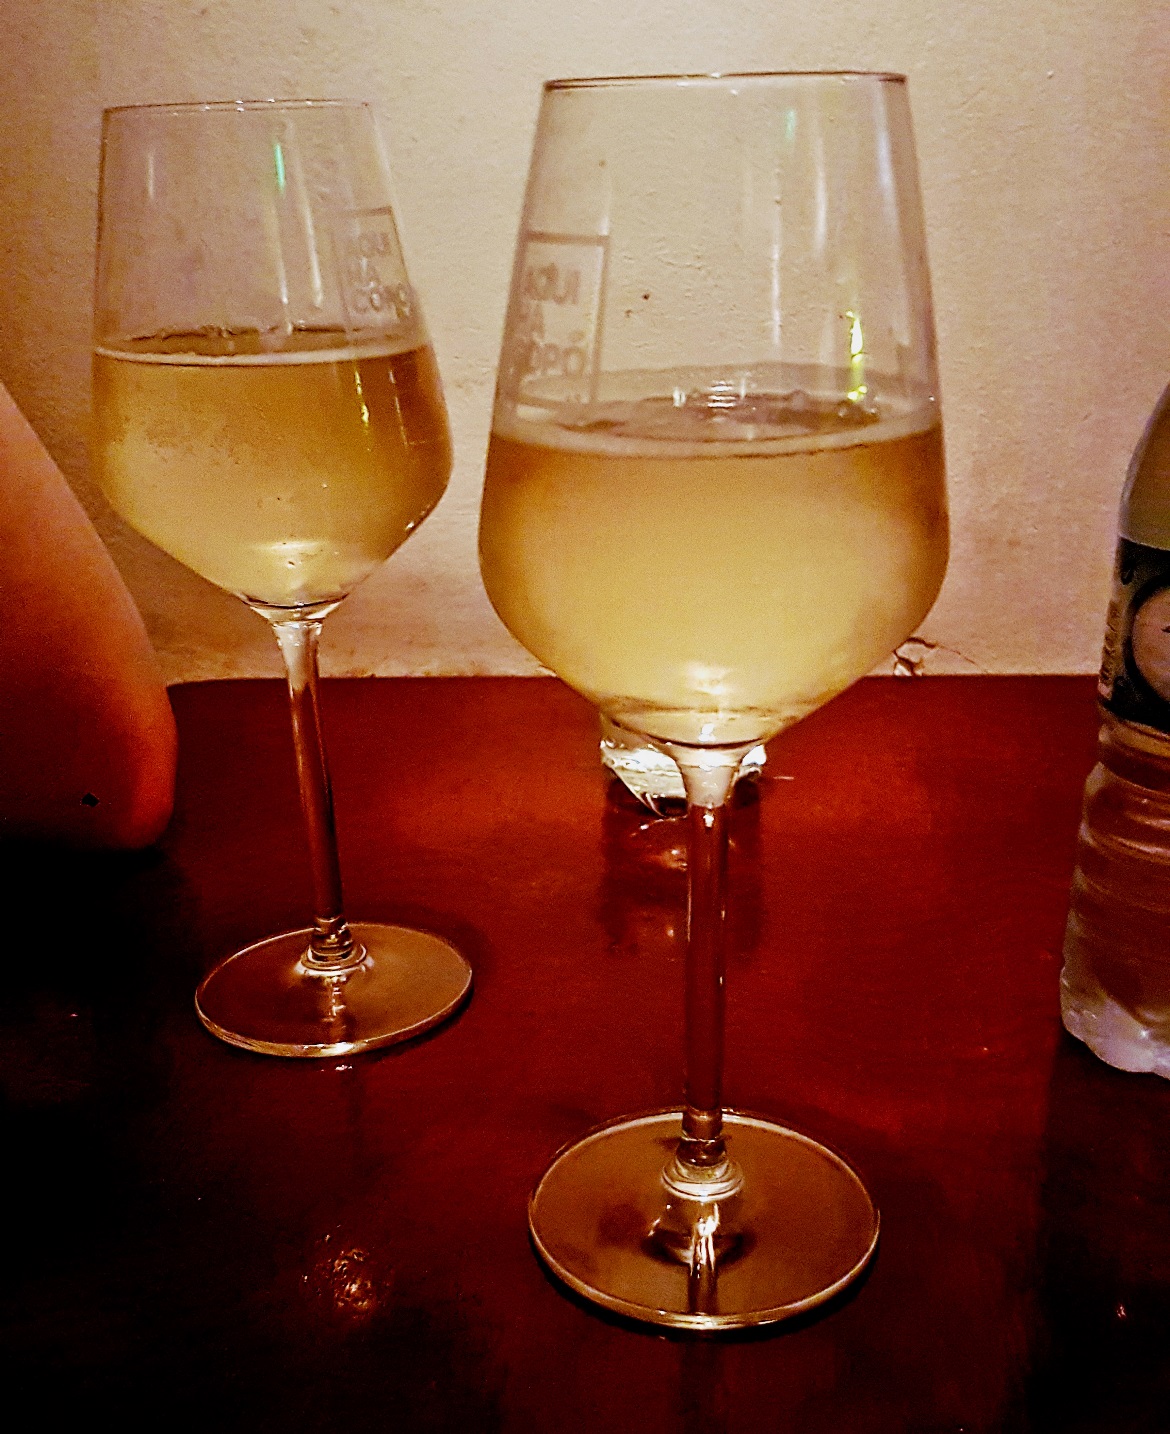 Vinho Verde at Clube da Esquina - Food and Drink in Lisbon, review by BeckyBecky Blogs